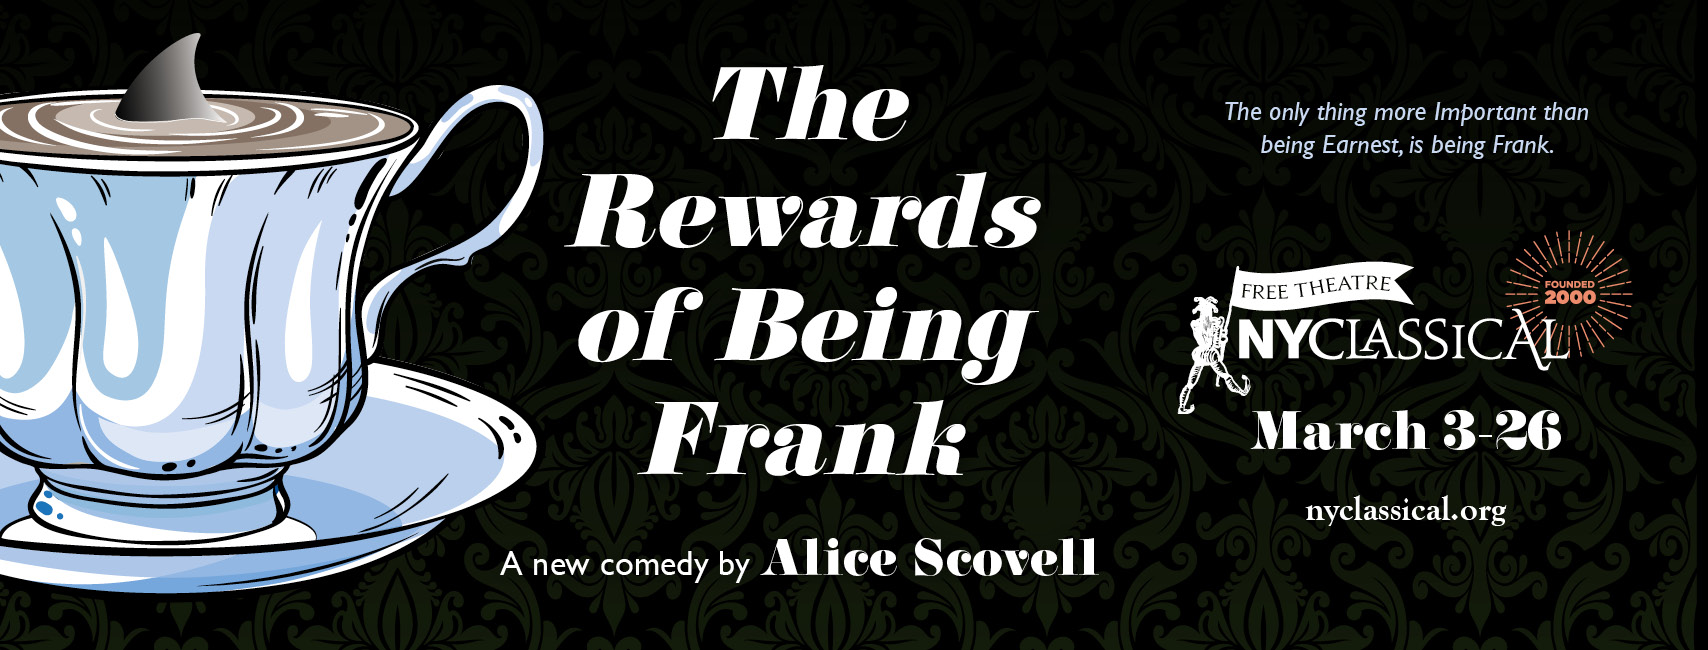 Image for The Rewards of Being Frank. To the left of the image there is a picture of a teacup. In the tea is a shark's fin visible above the surface. The title of the show is in the center of the image, and to the right is the logo for NY Classical theatre, and the show dates of March 3rd through 26th.